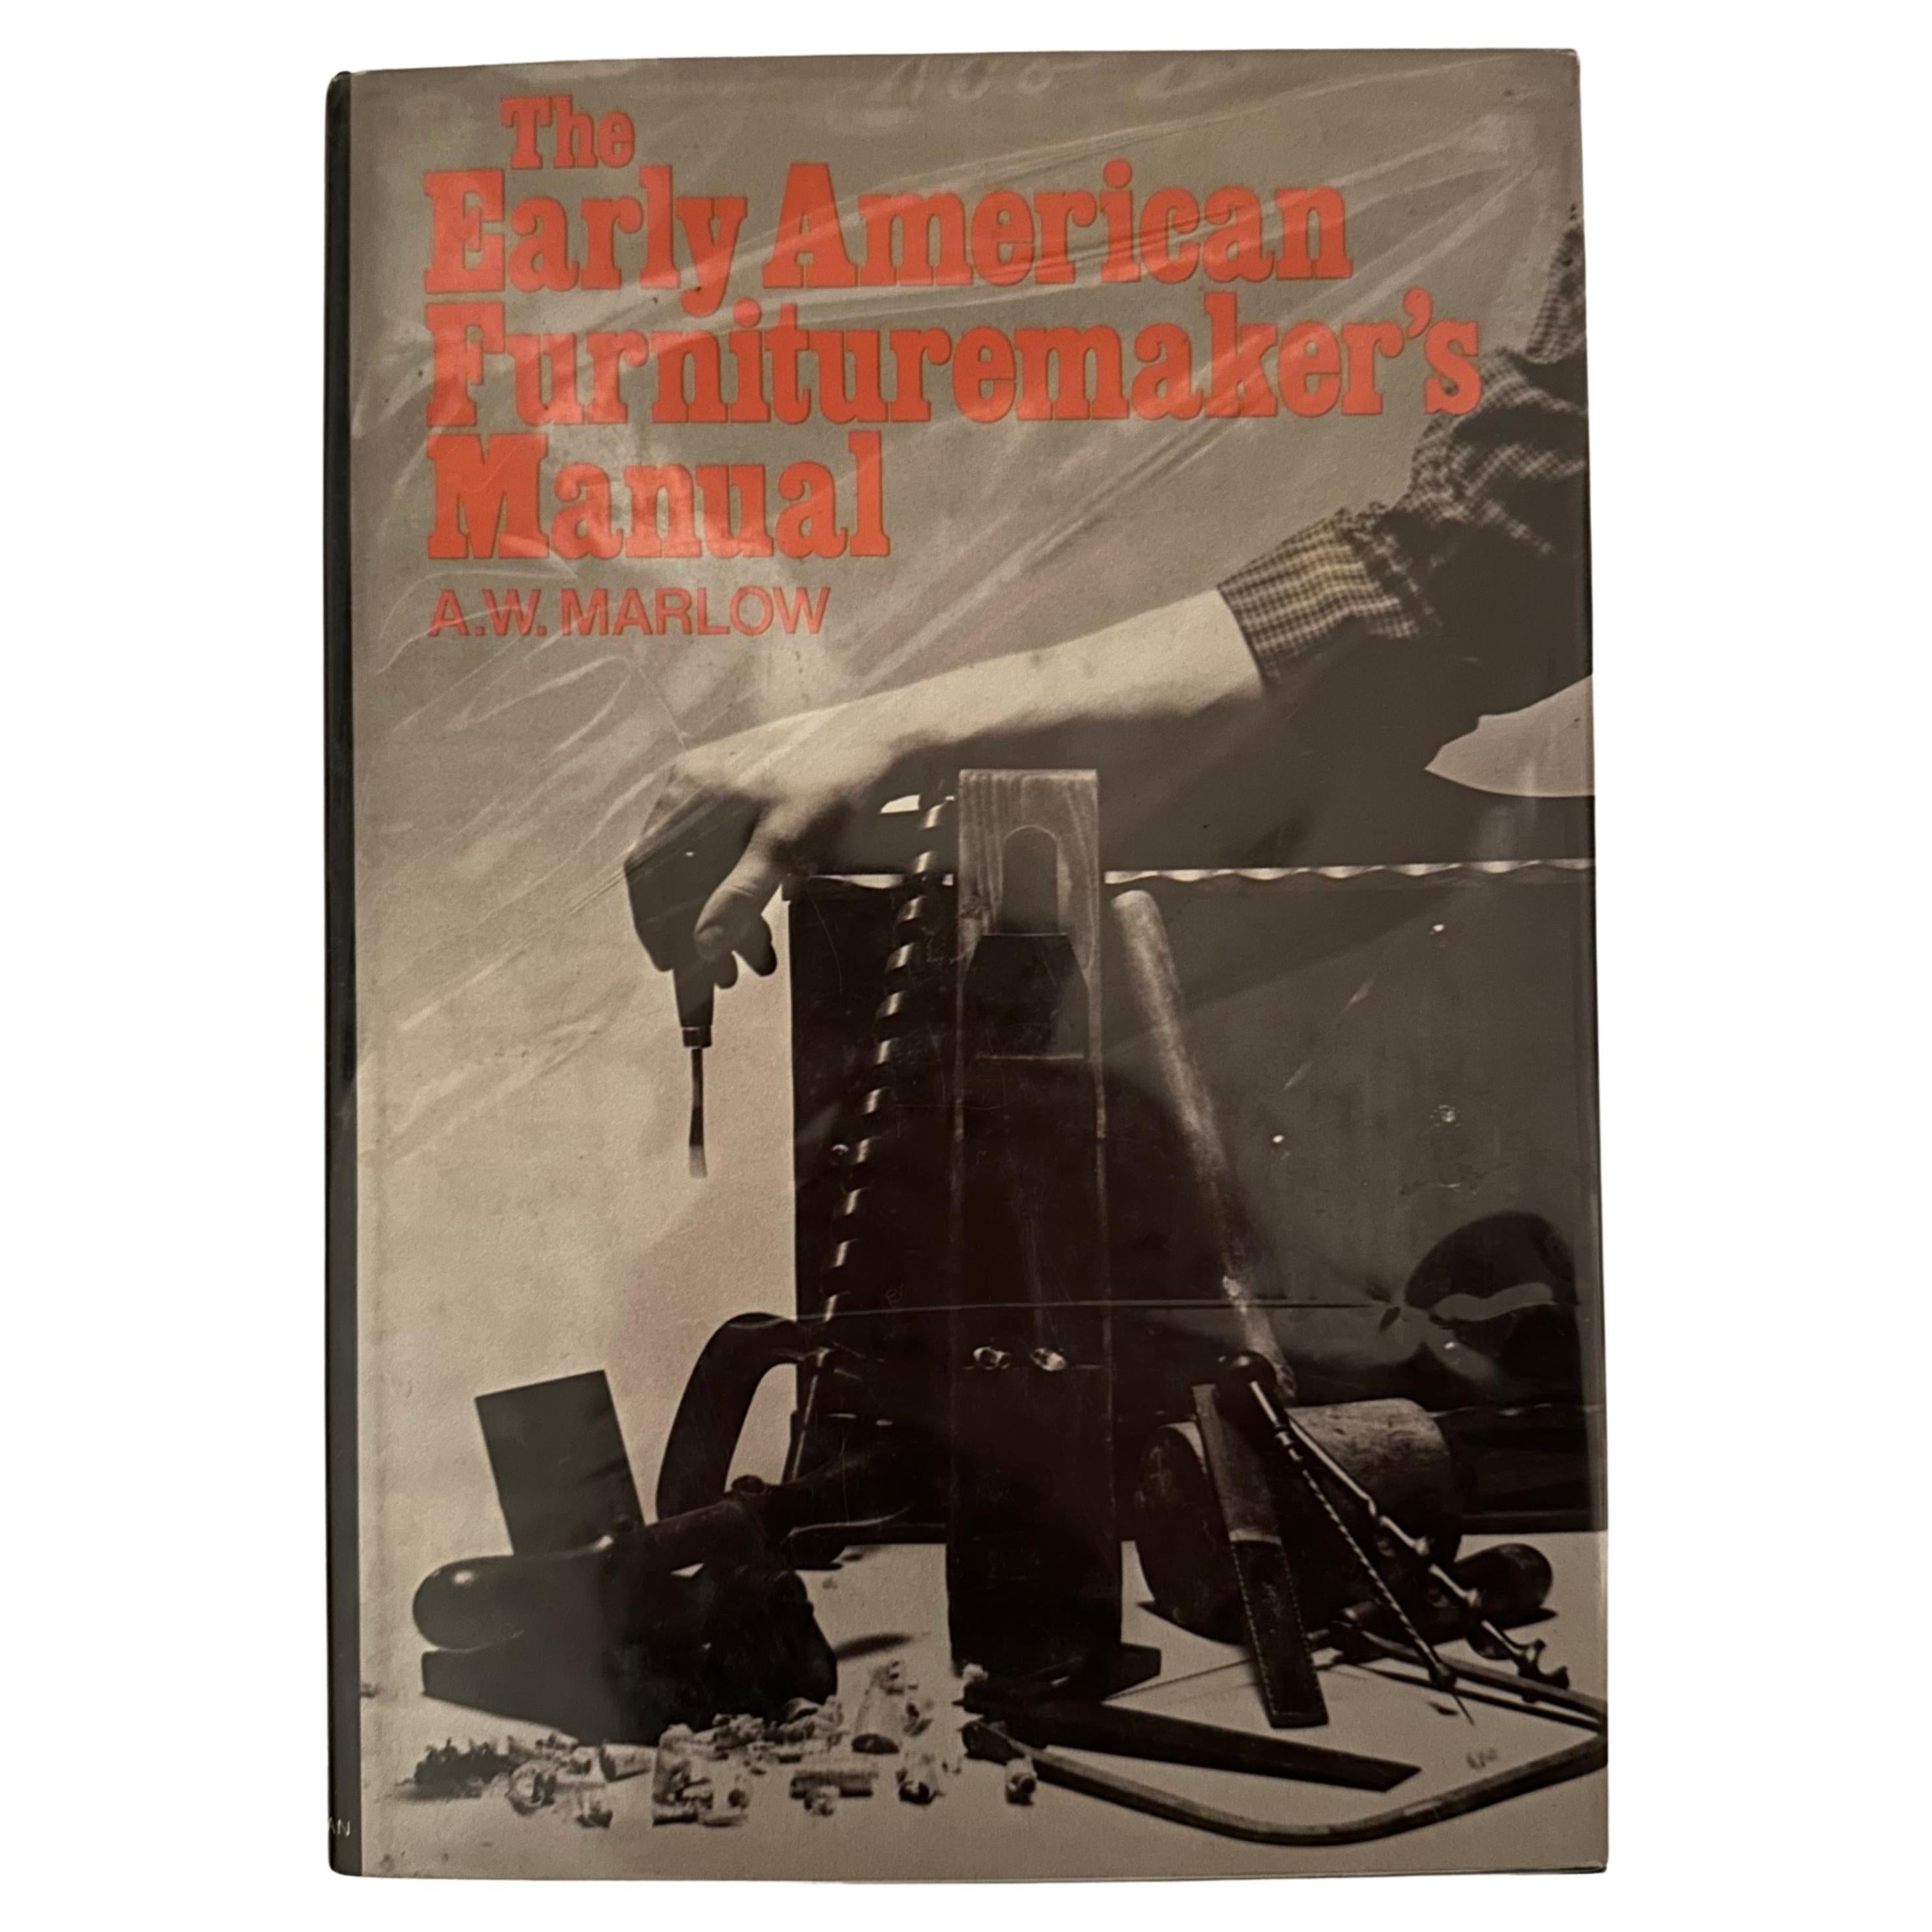 The Early American Furniture Maker's Manual - A. W. Marlow - New York, 1974